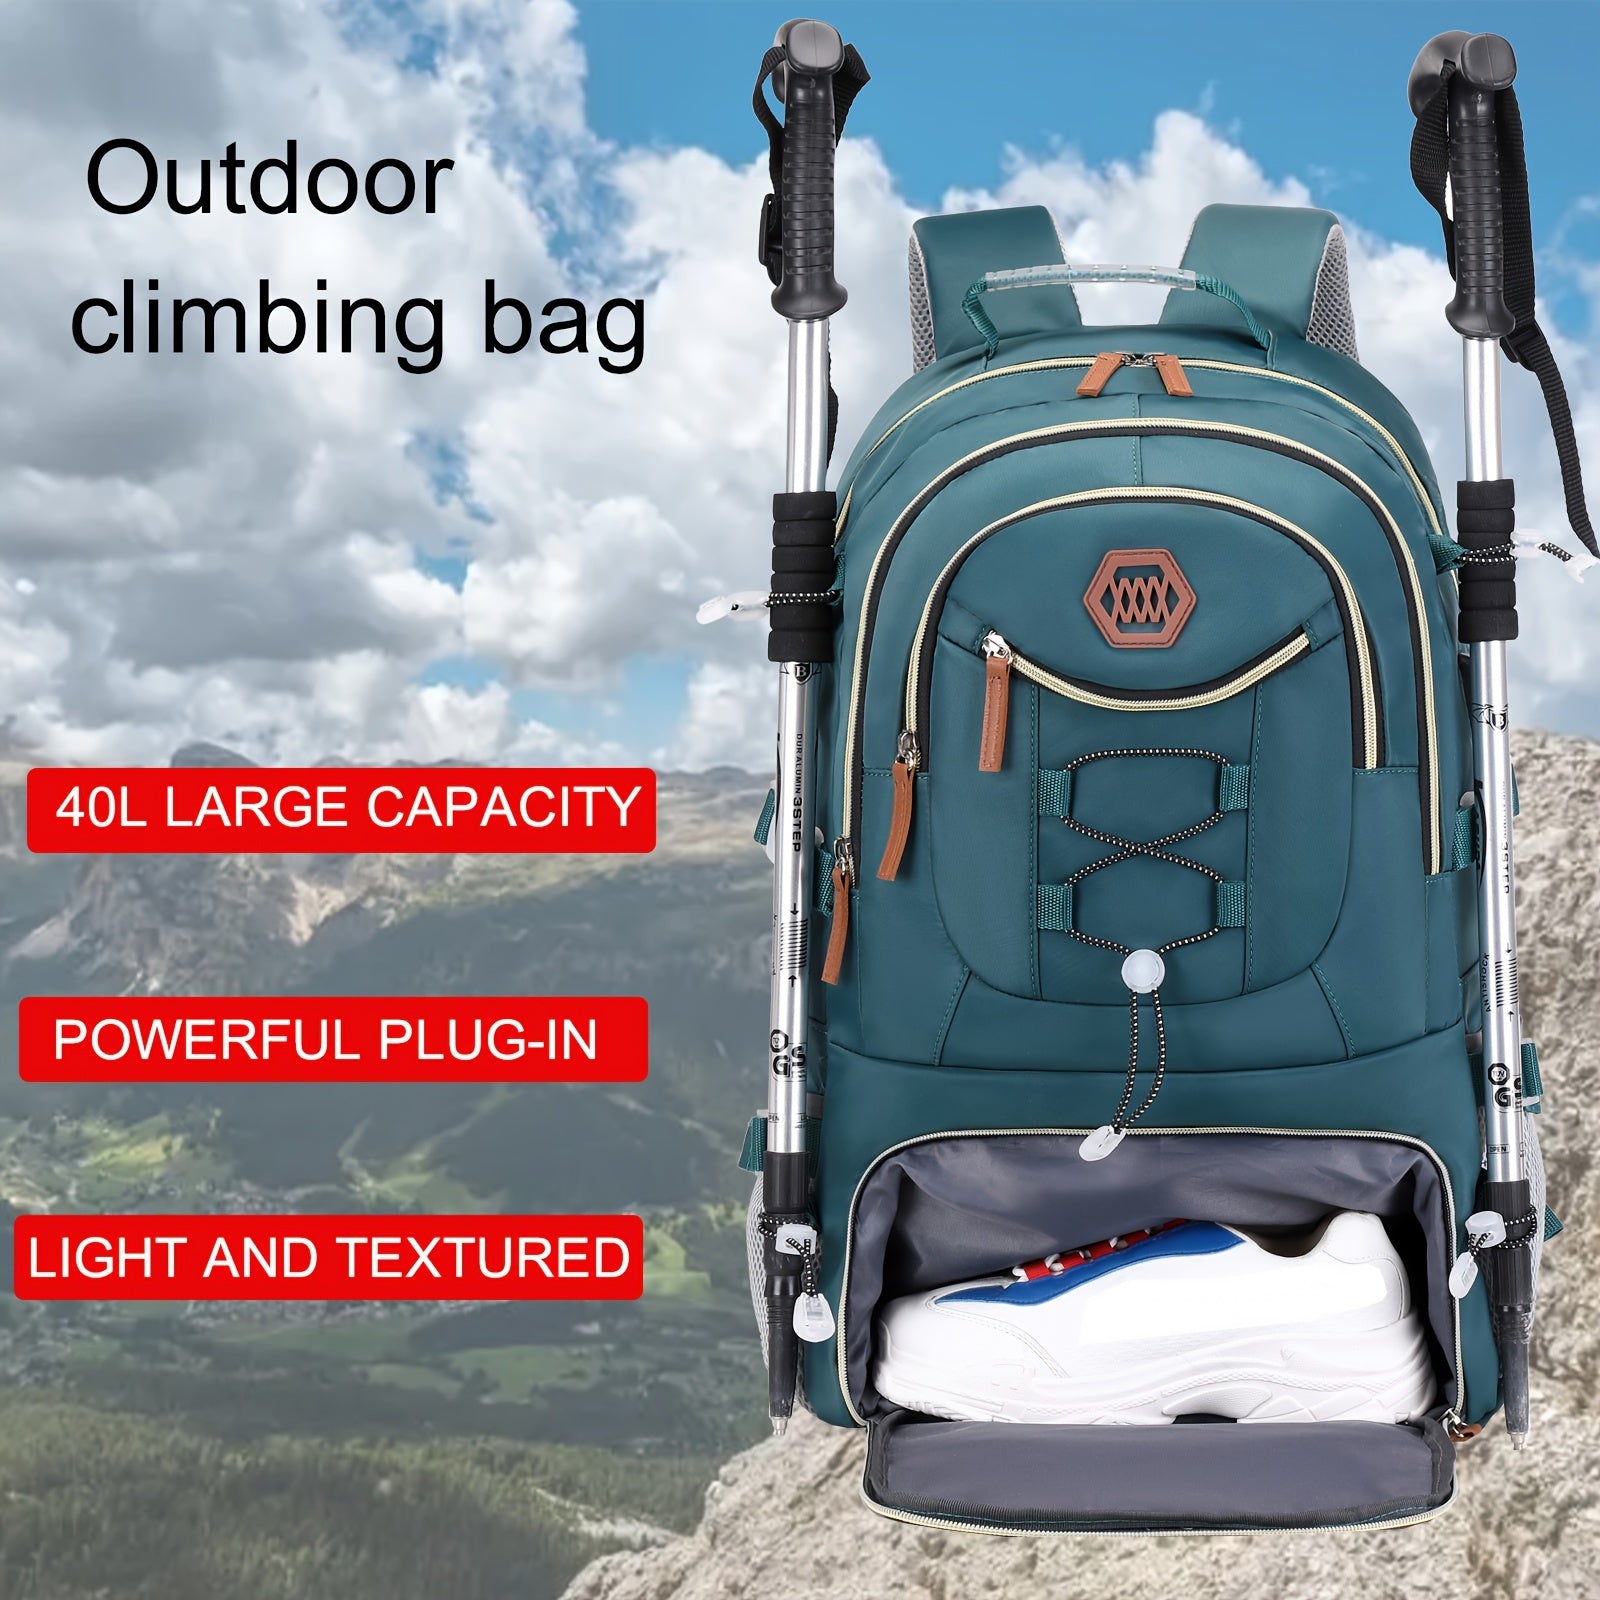 Camping Backpack With Shoe Compartment, Waterproof 43.18 Cm Laptop Schoolbag, Large Capacity Travel Rucksack